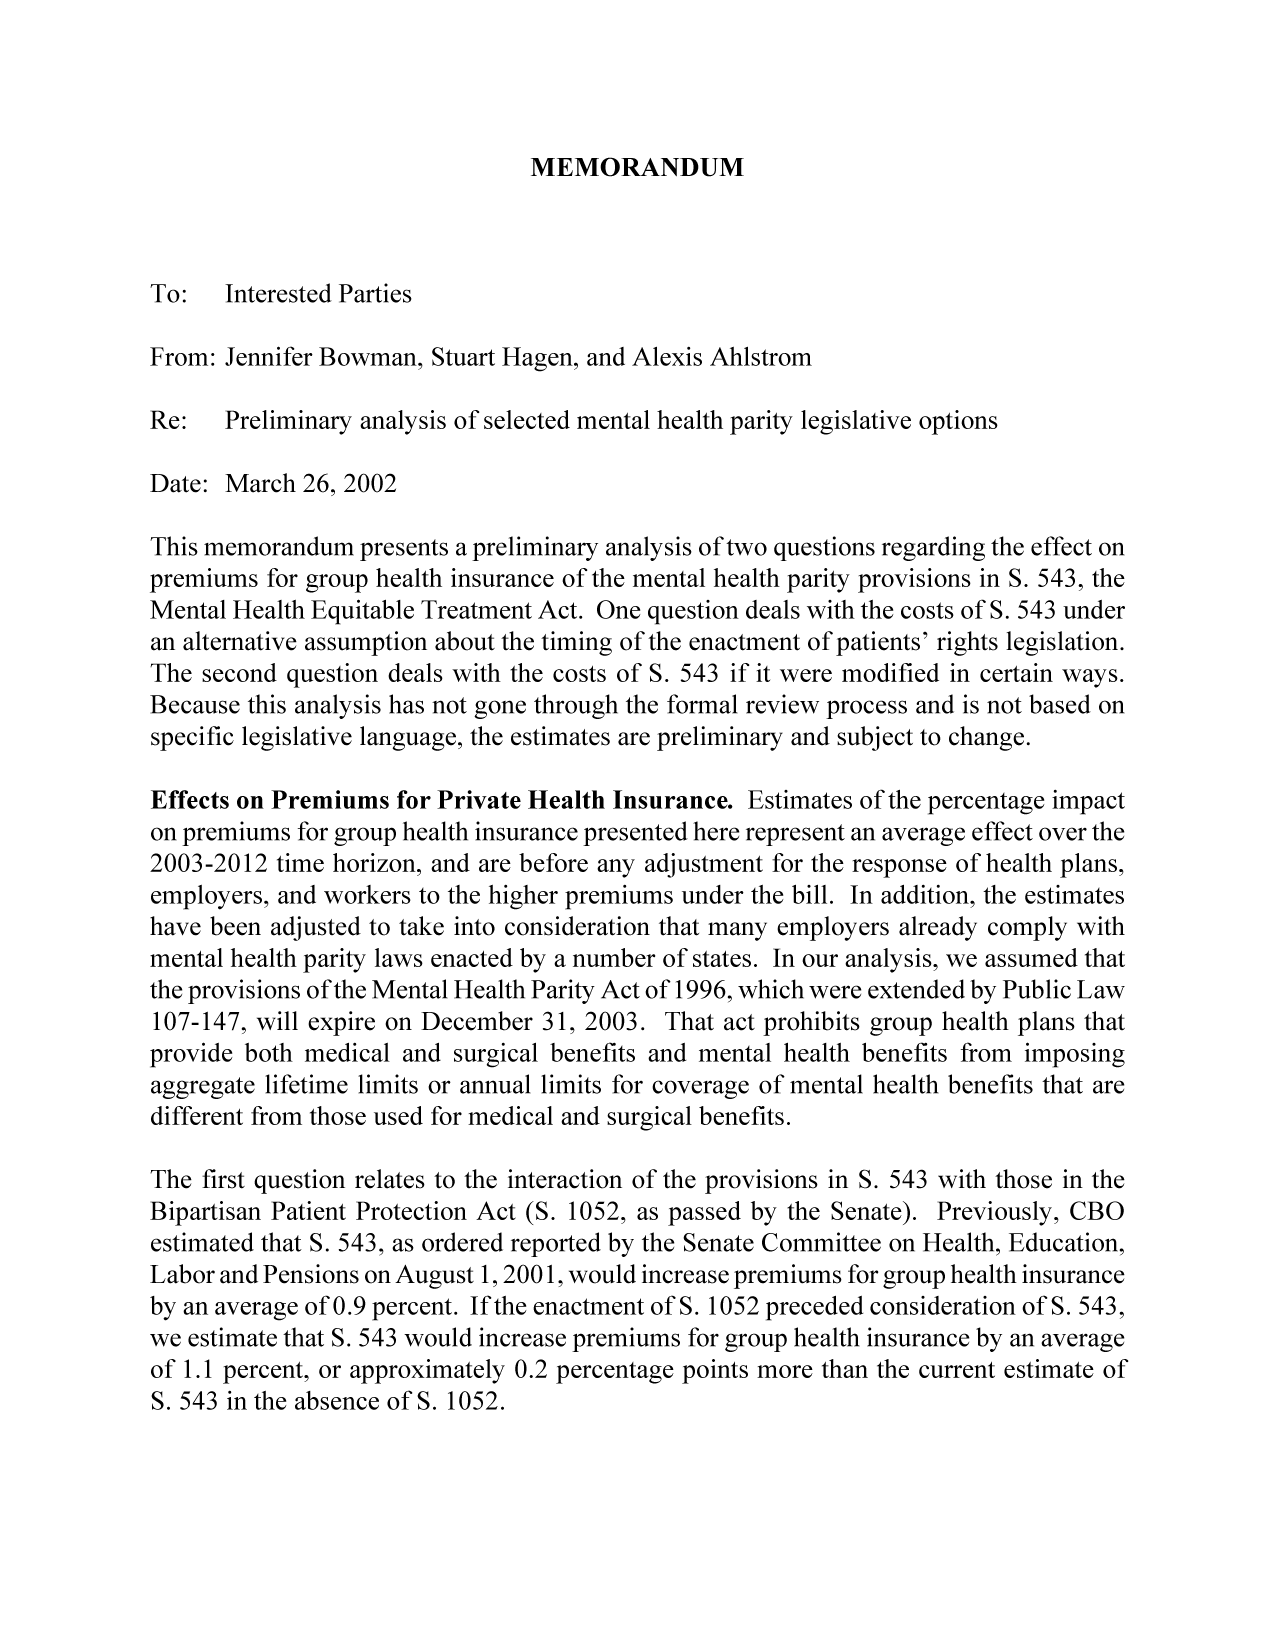 handle is hein.congrec/cbo9246 and id is 1 raw text is: MEMORANDUM

To:   Interested Parties
From: Jennifer Bowman, Stuart Hagen, and Alexis Ahlstrom
Re:   Preliminary analysis of selected mental health parity legislative options
Date: March 26, 2002
This memorandum presents a preliminary analysis of two questions regarding the effect on
premiums for group health insurance of the mental health parity provisions in S. 543, the
Mental Health Equitable Treatment Act. One question deals with the costs of S. 543 under
an alternative assumption about the timing of the enactment of patients' rights legislation.
The second question deals with the costs of S. 543 if it were modified in certain ways.
Because this analysis has not gone through the formal review process and is not based on
specific legislative language, the estimates are preliminary and subject to change.
Effects on Premiums for Private Health Insurance. Estimates of the percentage impact
on premiums for group health insurance presented here represent an average effect over the
2003-2012 time horizon, and are before any adjustment for the response of health plans,
employers, and workers to the higher premiums under the bill. In addition, the estimates
have been adjusted to take into consideration that many employers already comply with
mental health parity laws enacted by a number of states. In our analysis, we assumed that
the provisions of the Mental Health Parity Act of 1996, which were extended by Public Law
107-147, will expire on December 31, 2003. That act prohibits group health plans that
provide both medical and surgical benefits and mental health benefits from imposing
aggregate lifetime limits or annual limits for coverage of mental health benefits that are
different from those used for medical and surgical benefits.
The first question relates to the interaction of the provisions in S. 543 with those in the
Bipartisan Patient Protection Act (S. 1052, as passed by the Senate). Previously, CBO
estimated that S. 543, as ordered reported by the Senate Committee on Health, Education,
Labor and Pensions on August 1, 2001, would increase premiums for group health insurance
by an average of 0.9 percent. If the enactment of S. 1052 preceded consideration of S. 543,
we estimate that S. 543 would increase premiums for group health insurance by an average
of 1.1 percent, or approximately 0.2 percentage points more than the current estimate of
S.543 inthe absence of5. 1052.


